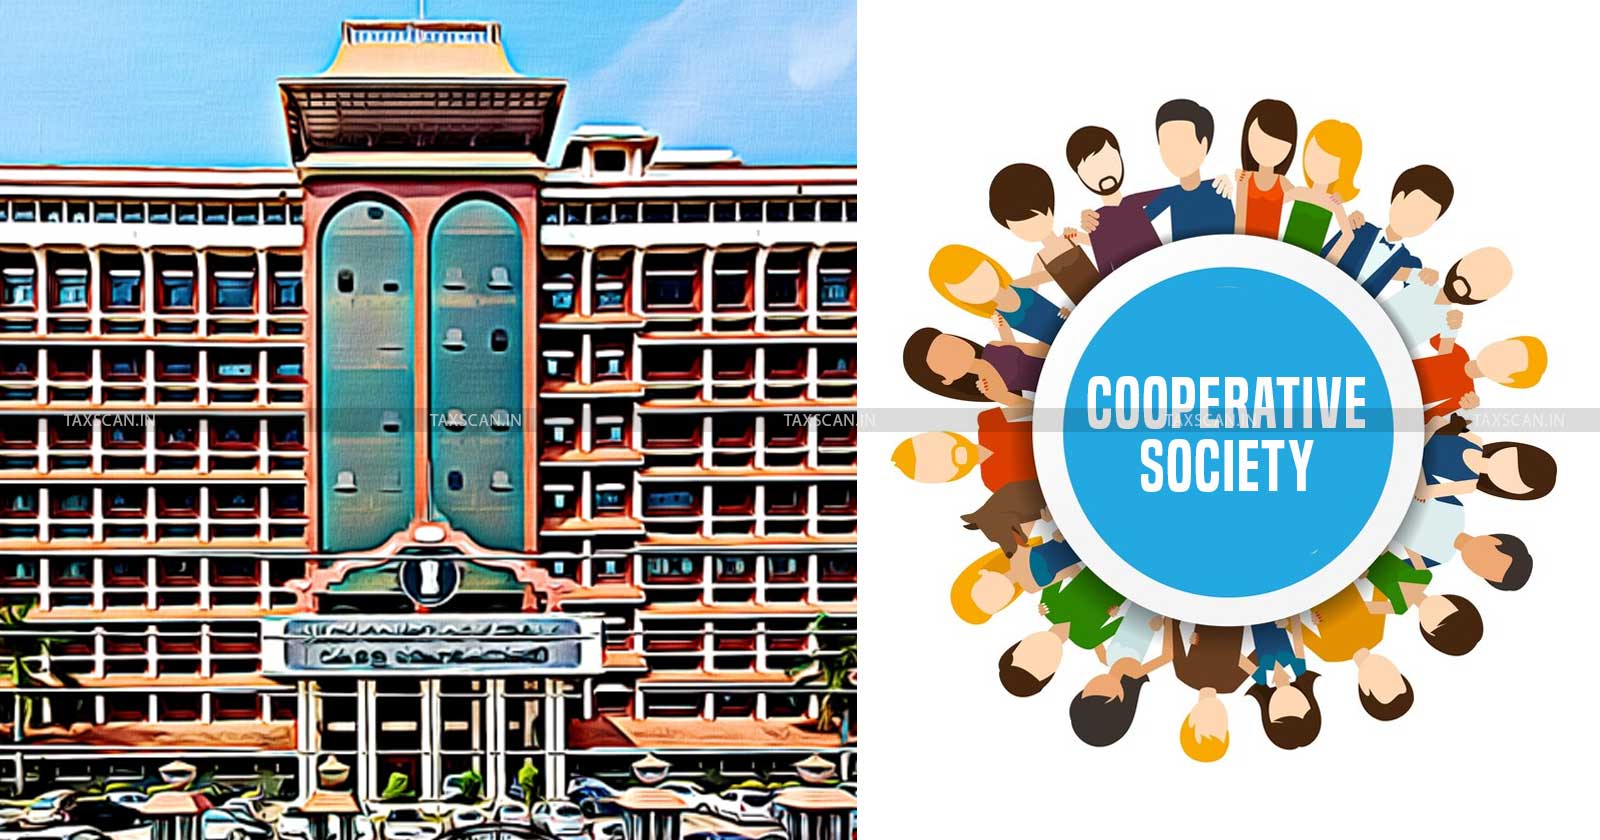 Co-operative society - providing Credits for Agricultural Purposes - Primary Agricultural Credit Society - KERALA HIGH COURT - Income Tax Assessment - Rejecting Deduction Under Section 80 P - TAXSCAN